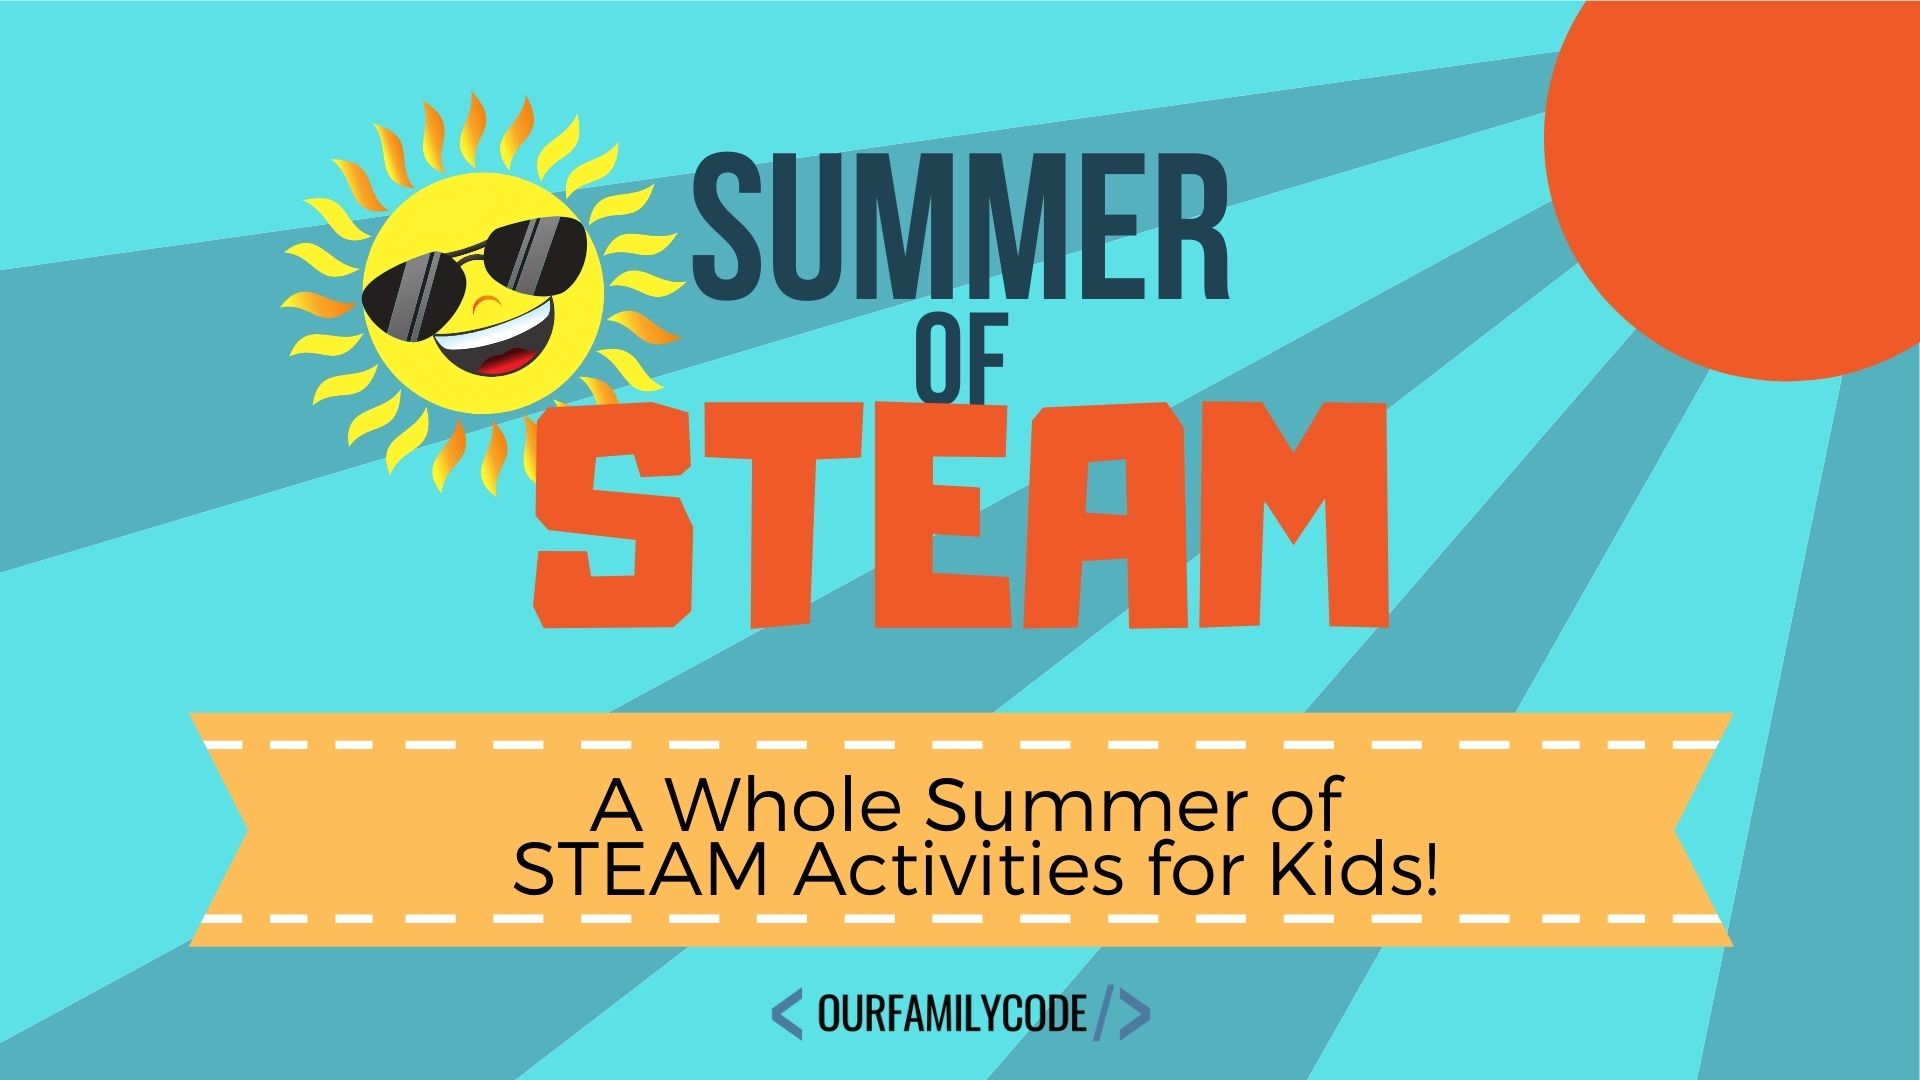 BH FB Summer of Steam Activities for Kids